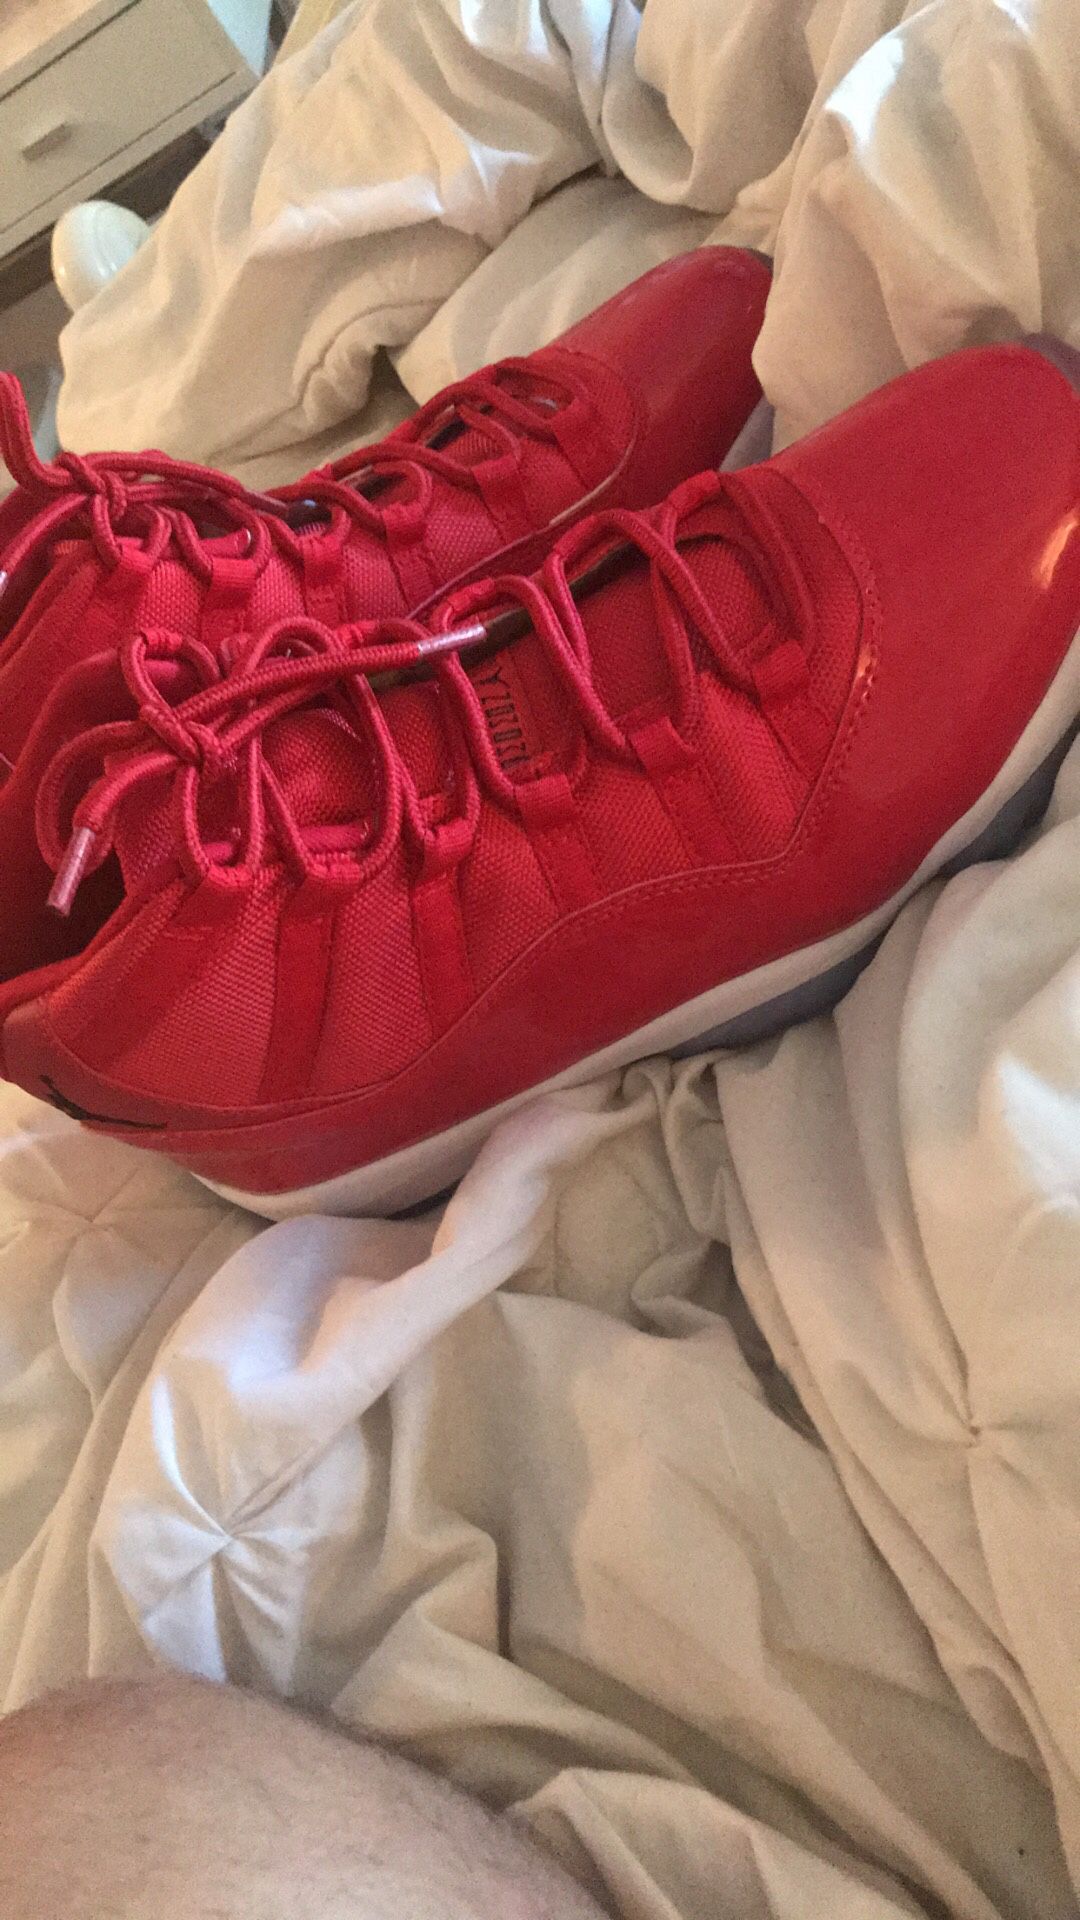 Gym Red 11s for sale AAA price is firm